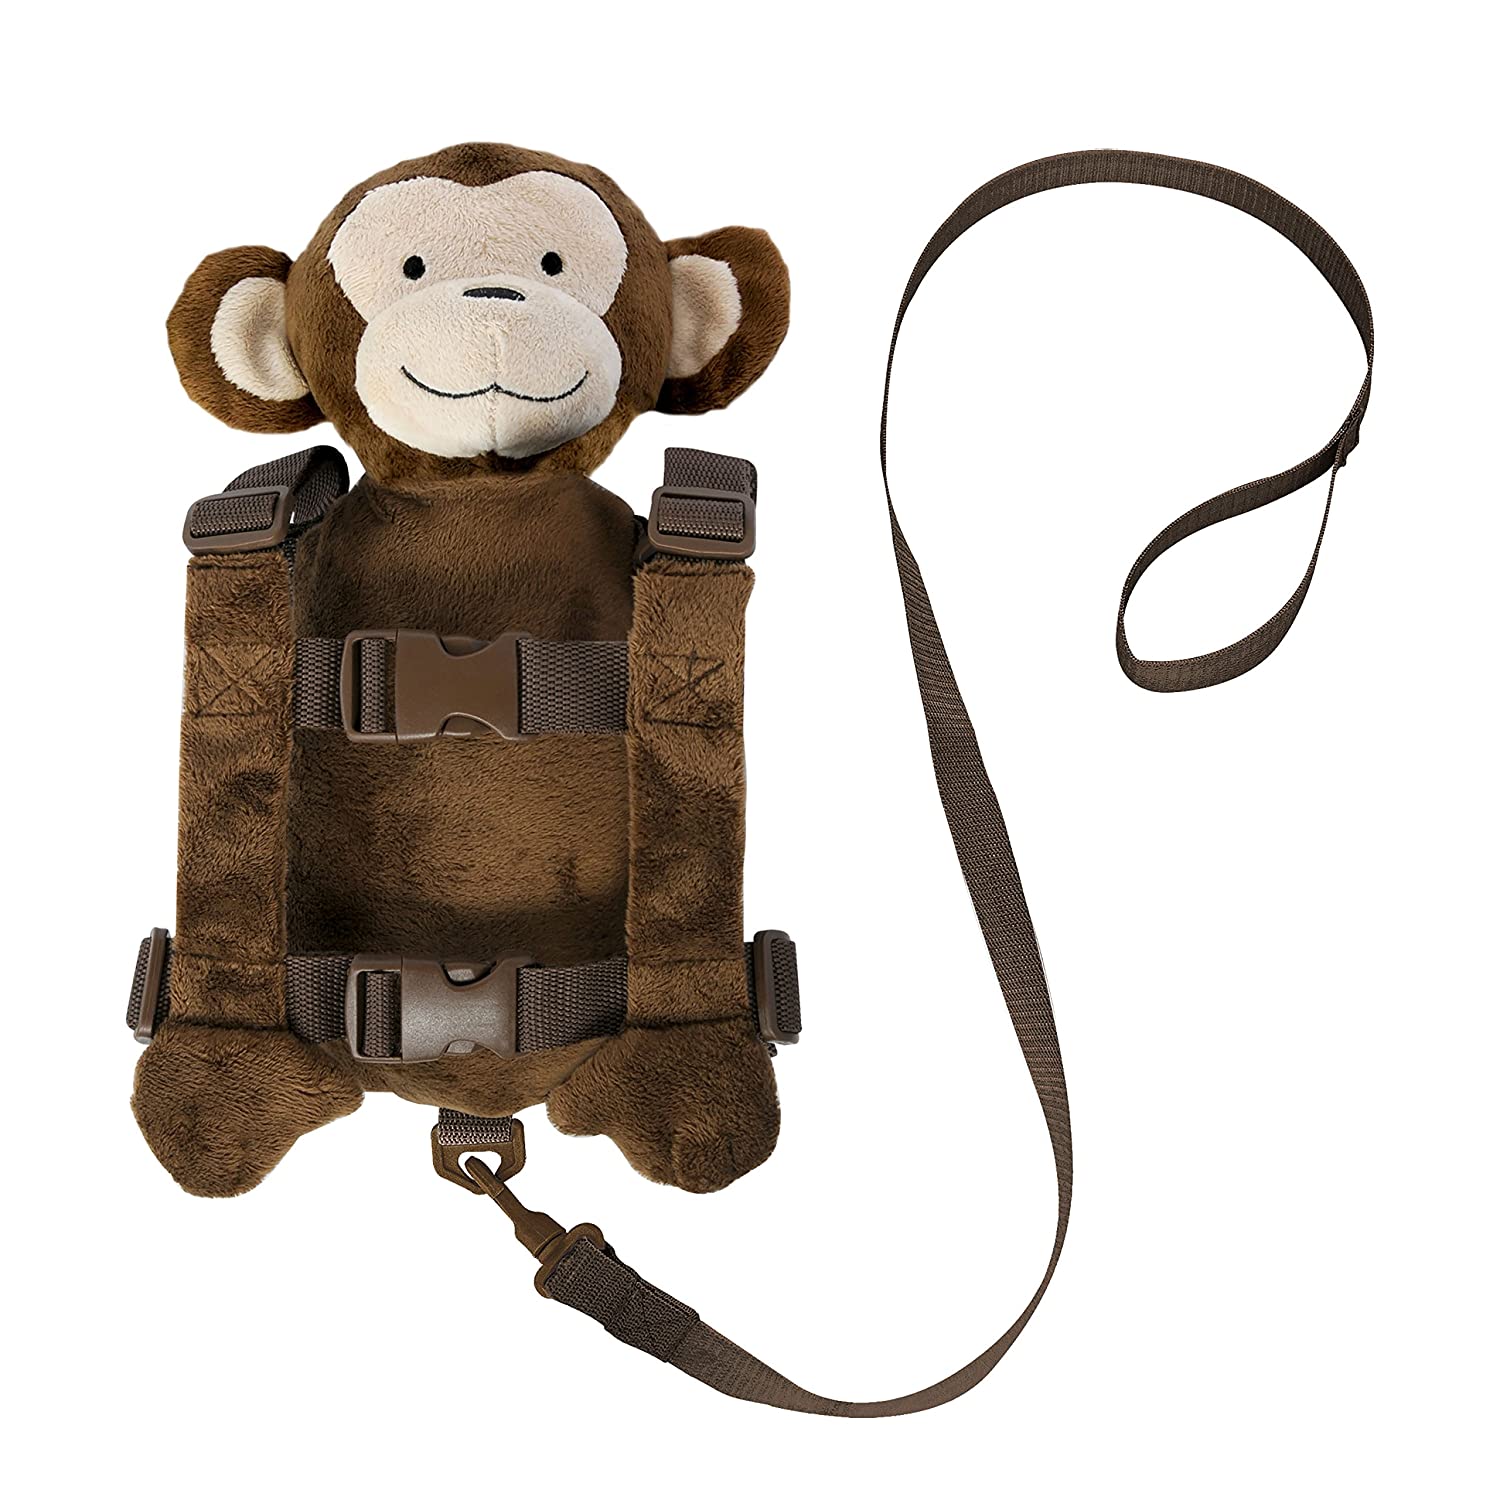 Top 7 Best Child Leashes, Backpacks, Straps & Harness Reviews in 2022 1